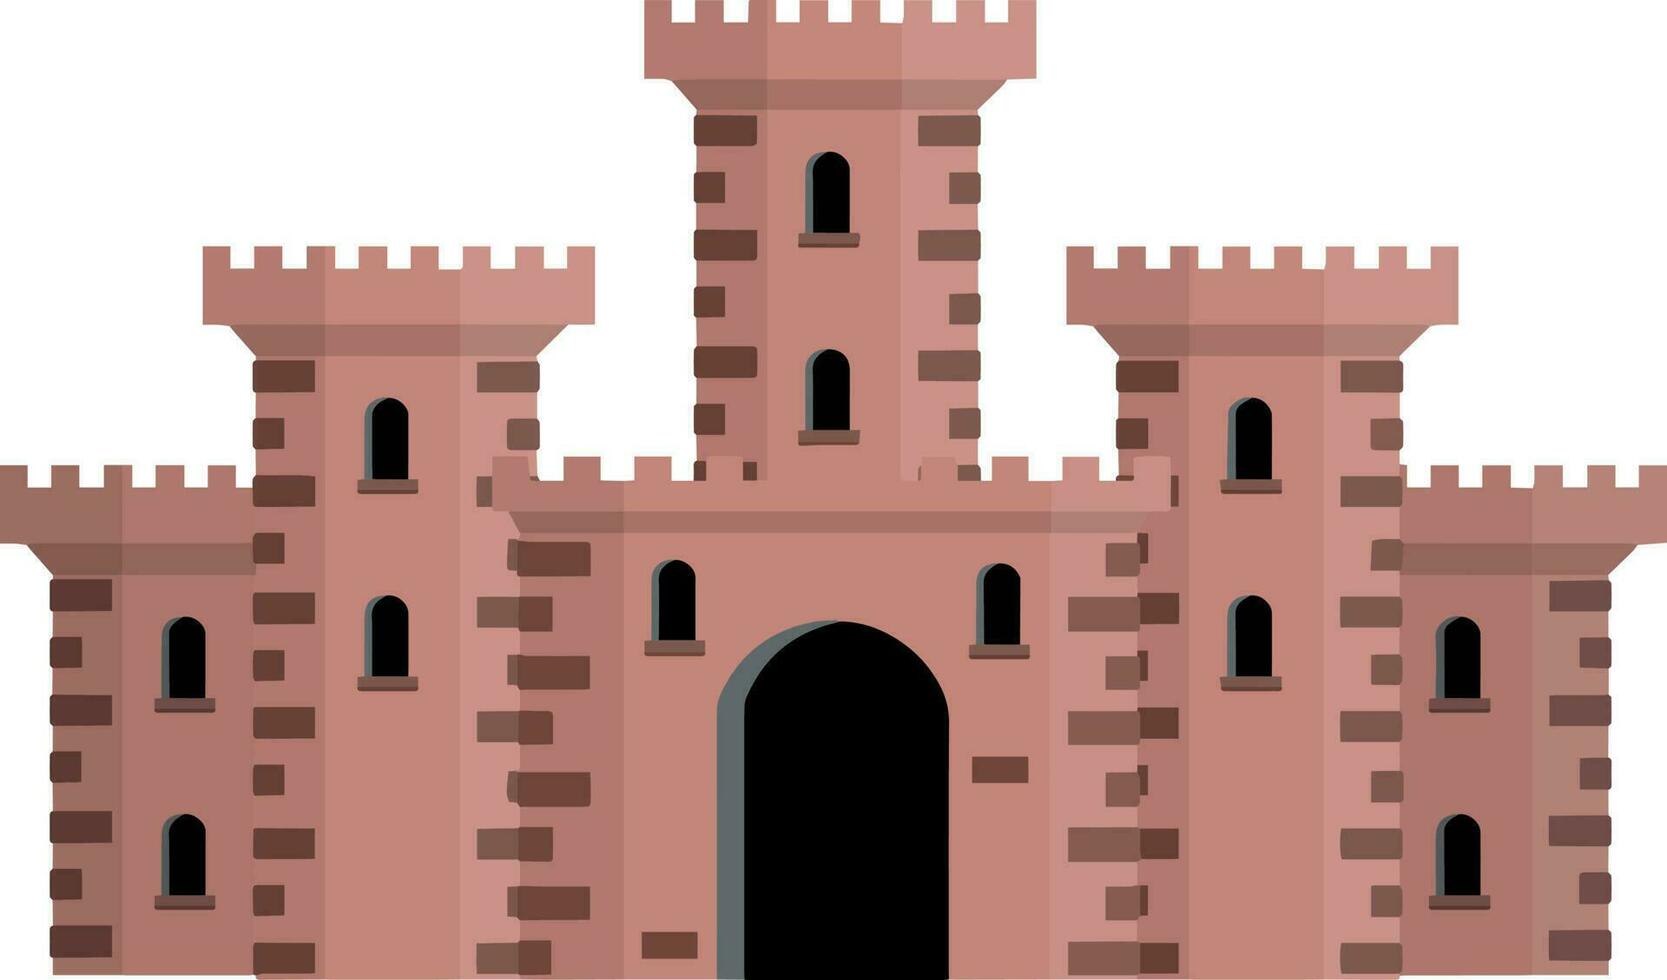 Medieval European stone castle. Knights fortress. Concept of security, protection and defense. Cartoon flat illustration. Military building with walls, gates and big tower. vector